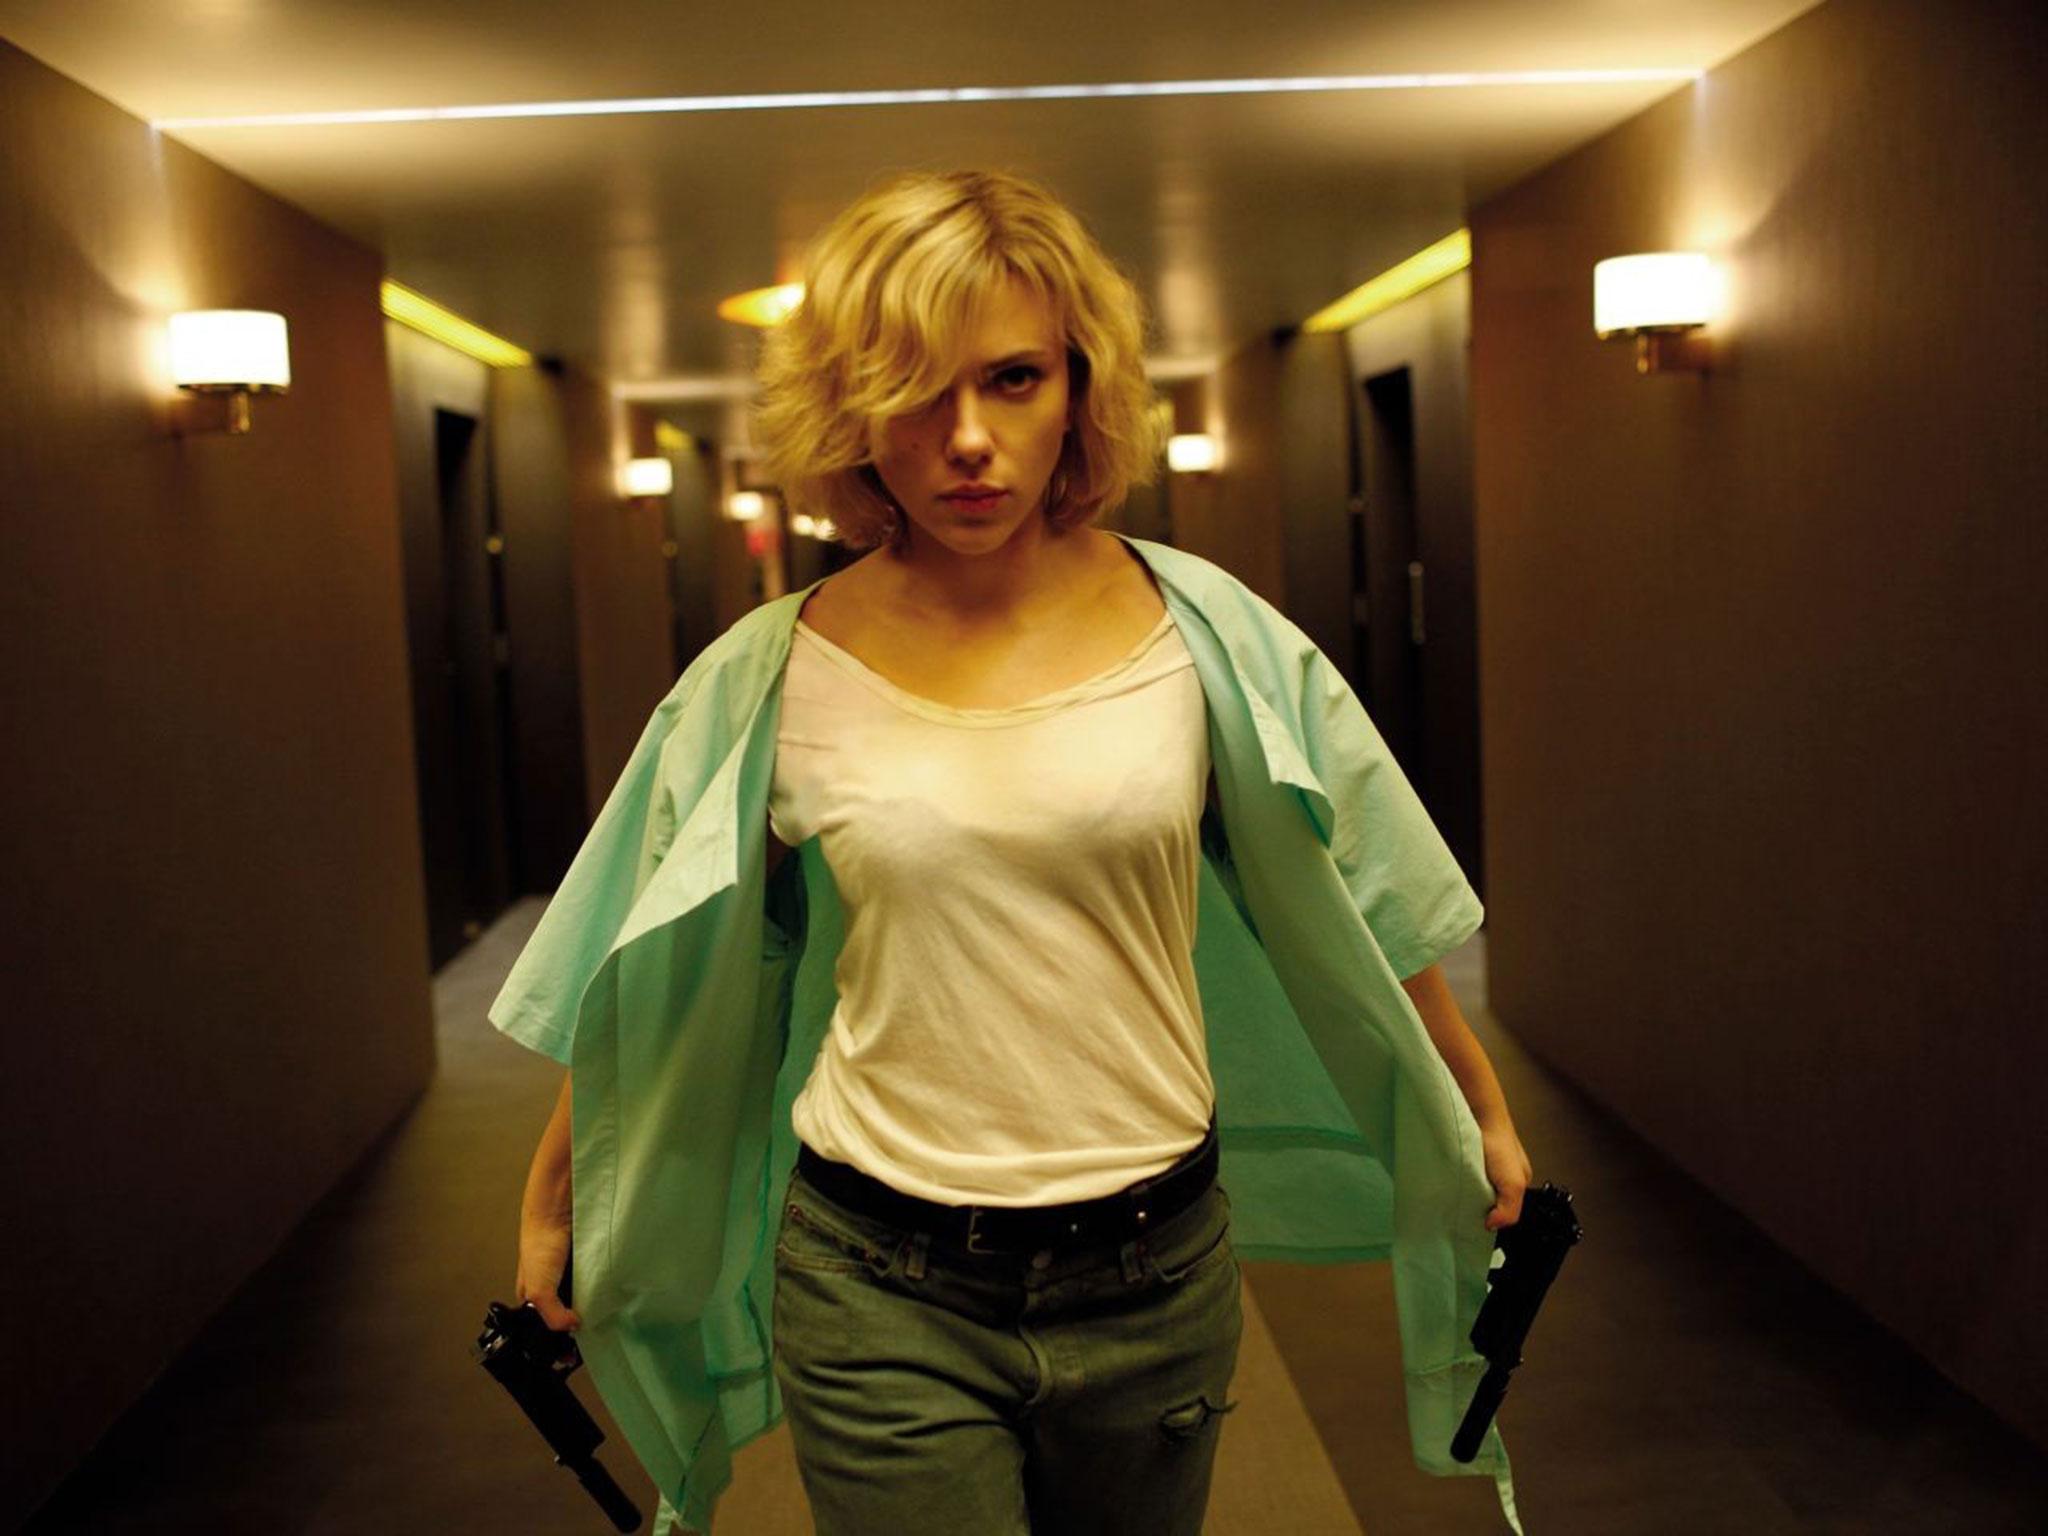 Lucy Film Review Scarlett Johansson Will Blow Your Mind In Luc Besson S Complex Thriller The Independent The Independent